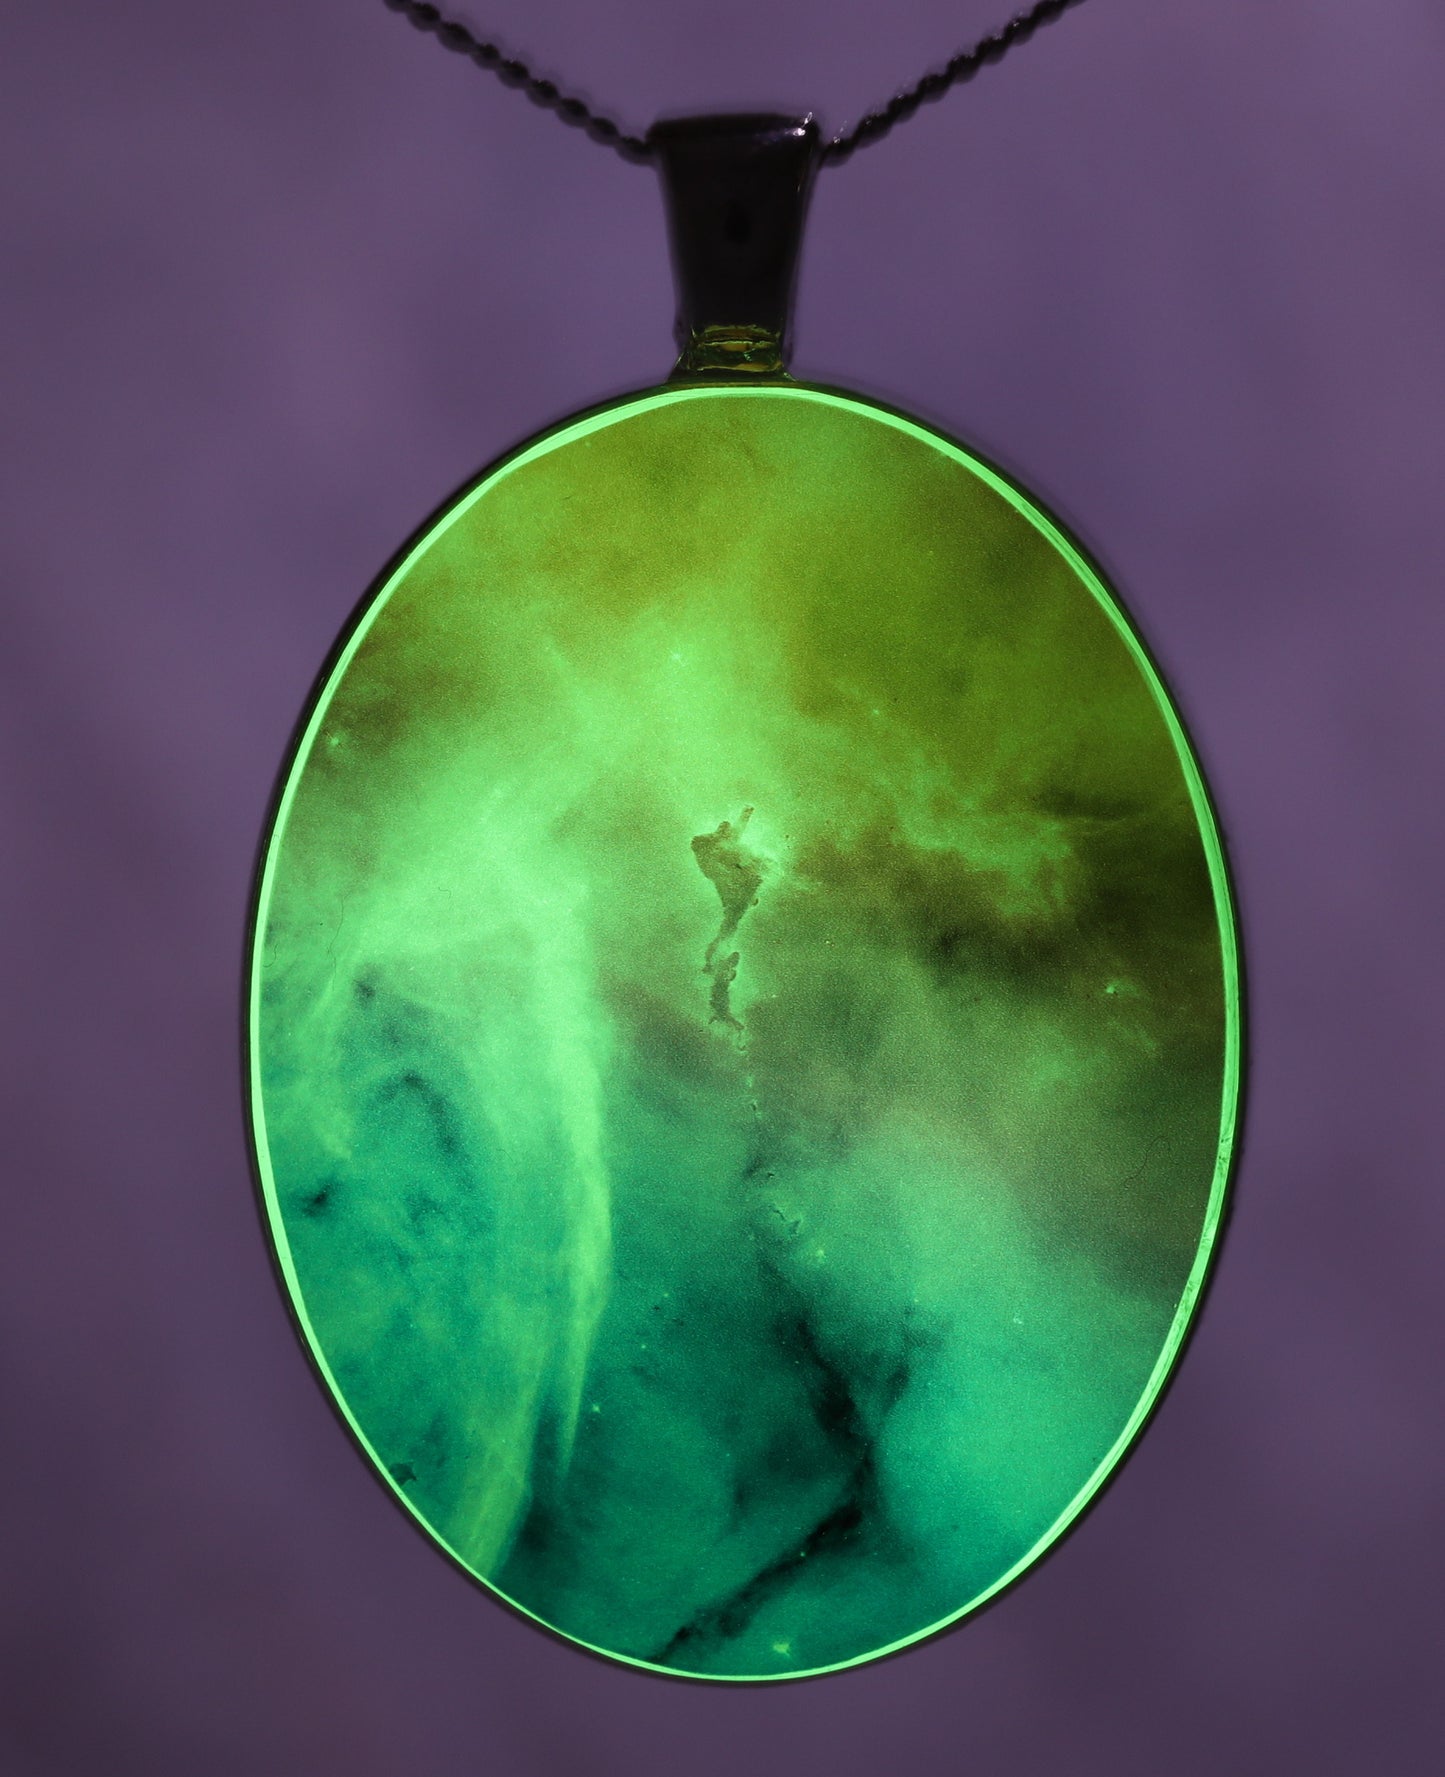 Glow-in-the-dark astronomy pendant with a beautiful astrophotography image of the Carina nebula